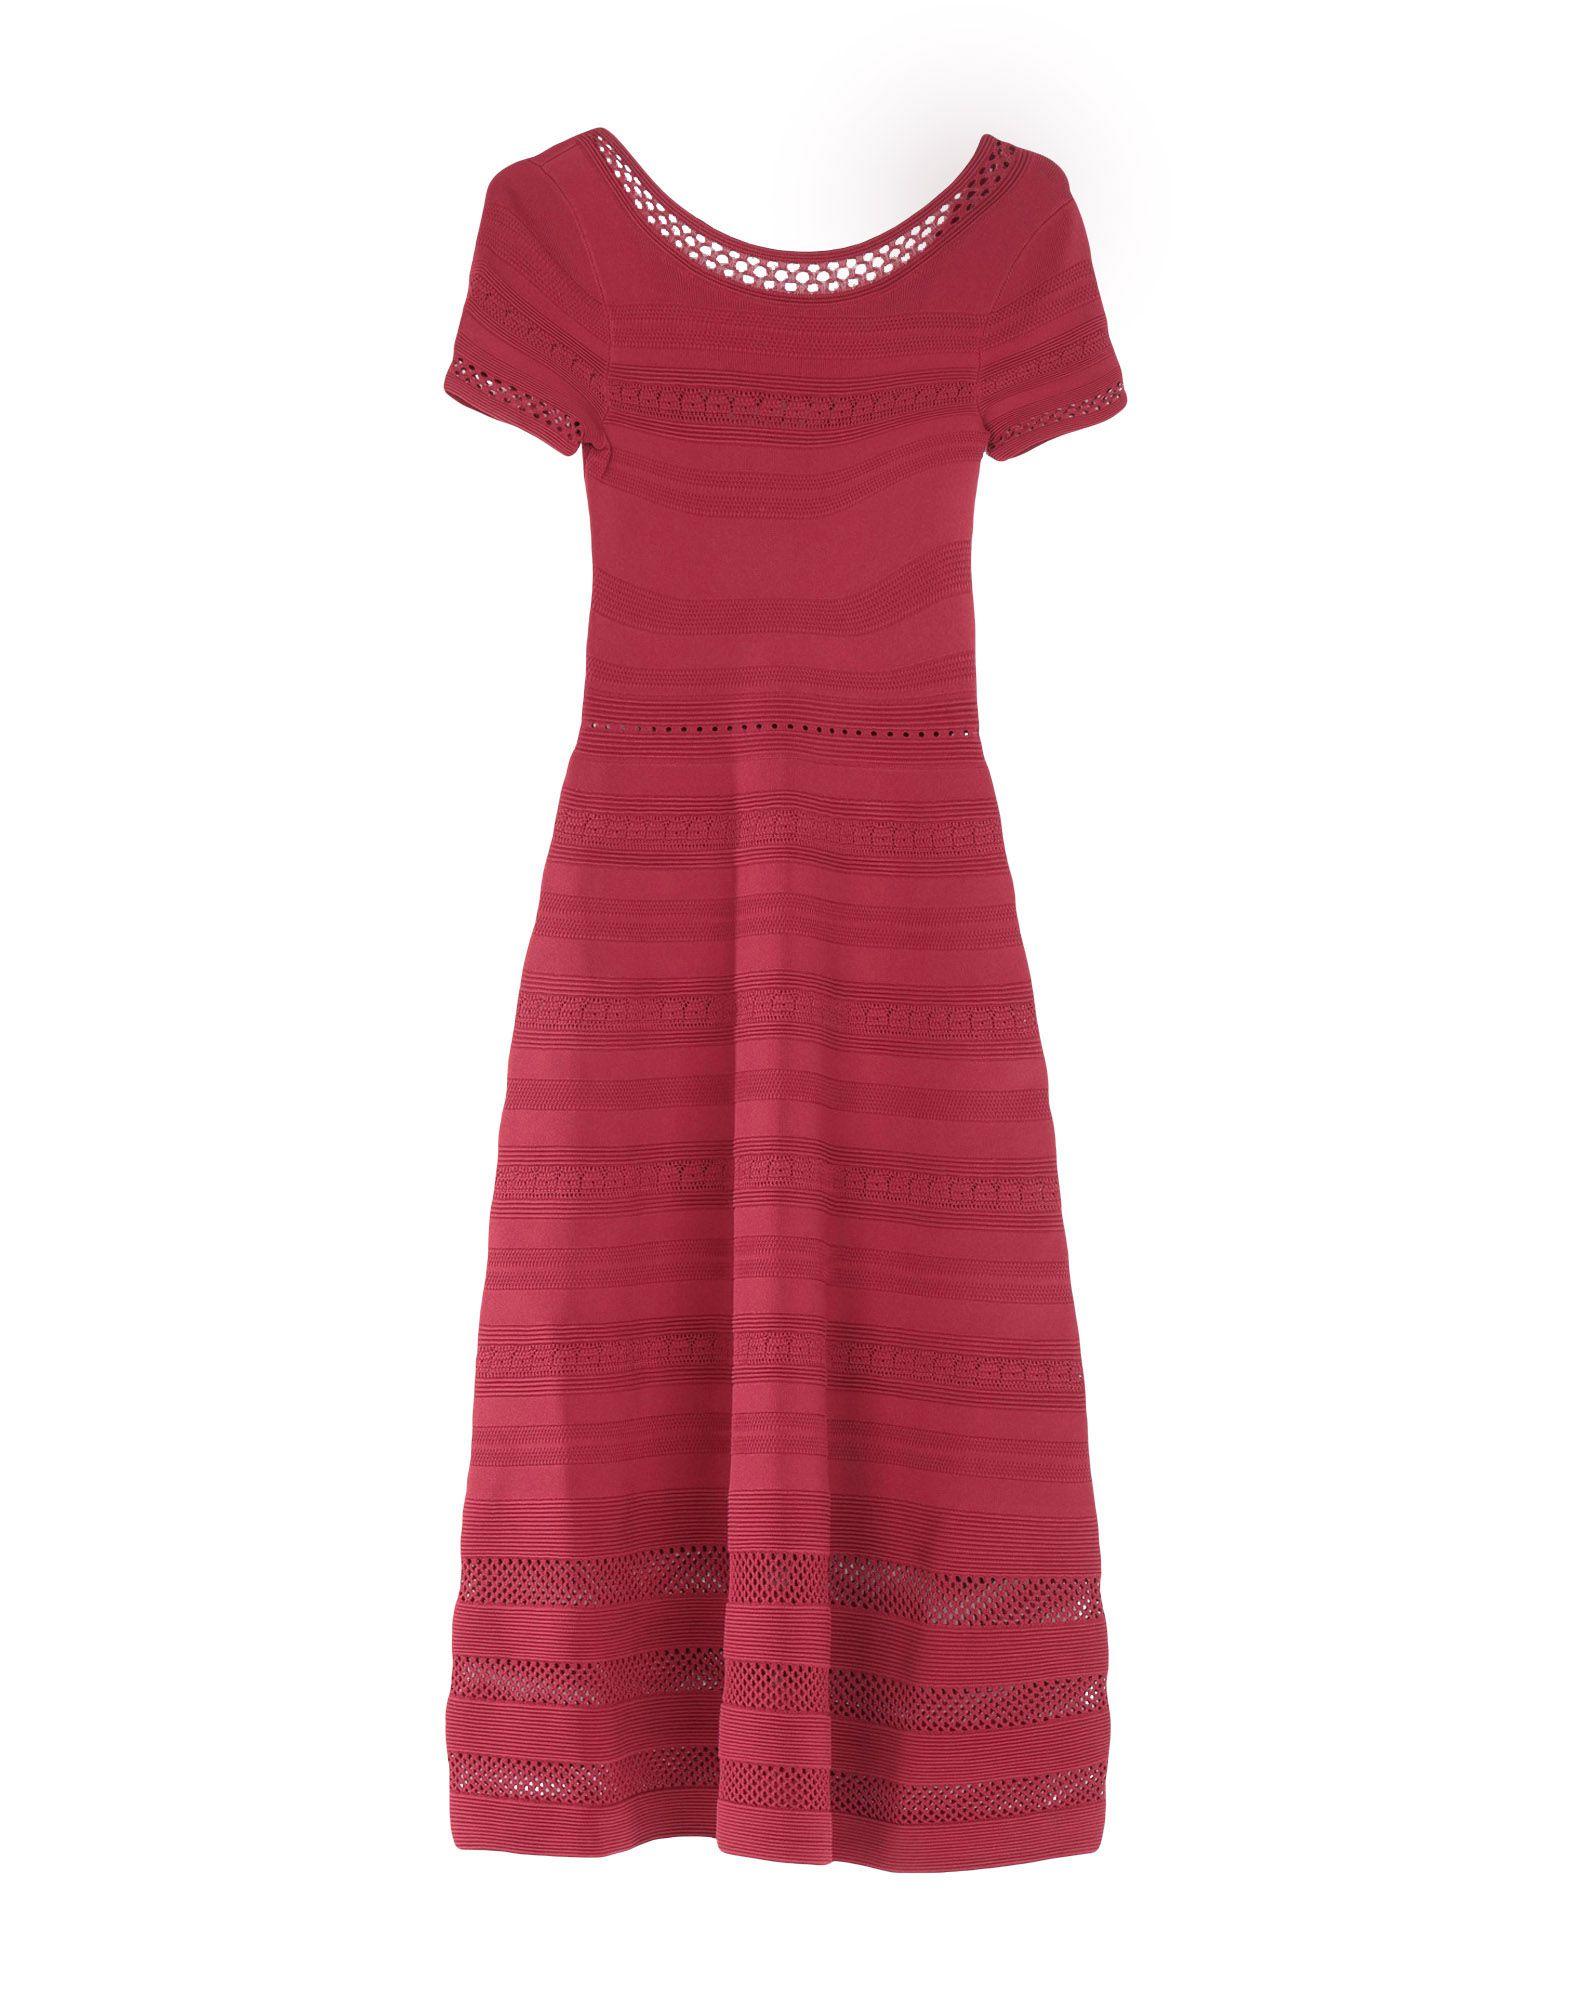 Lyst - Sandro 3/4 Length Dress in Red - Save 9%